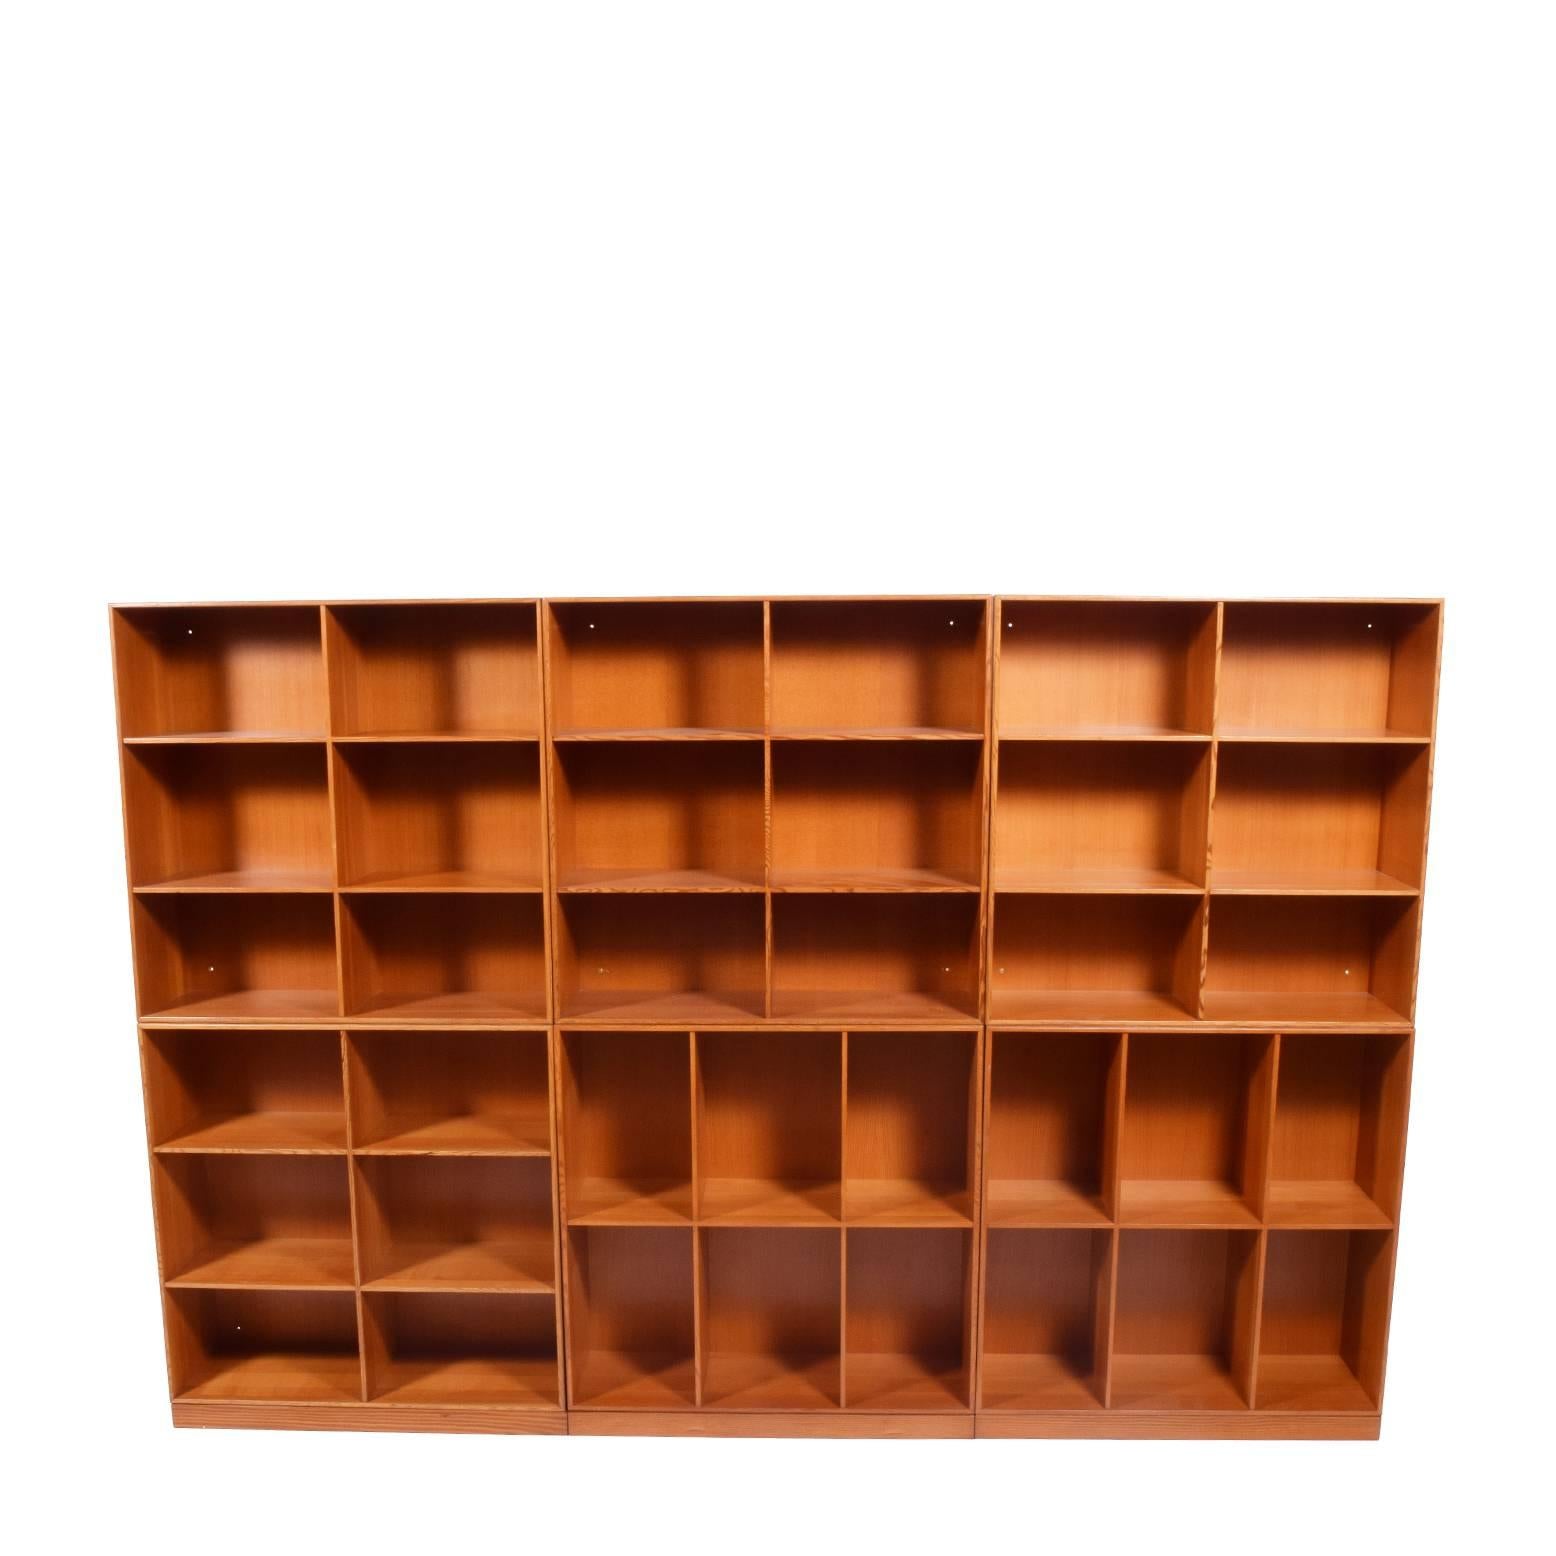 A Danish Classic, solid Oregon pine nine open bookcases all with manufacturing label on the back. Rud Rasmussen originally designed in the 1920s.

Measure: Each cabinet 29.75